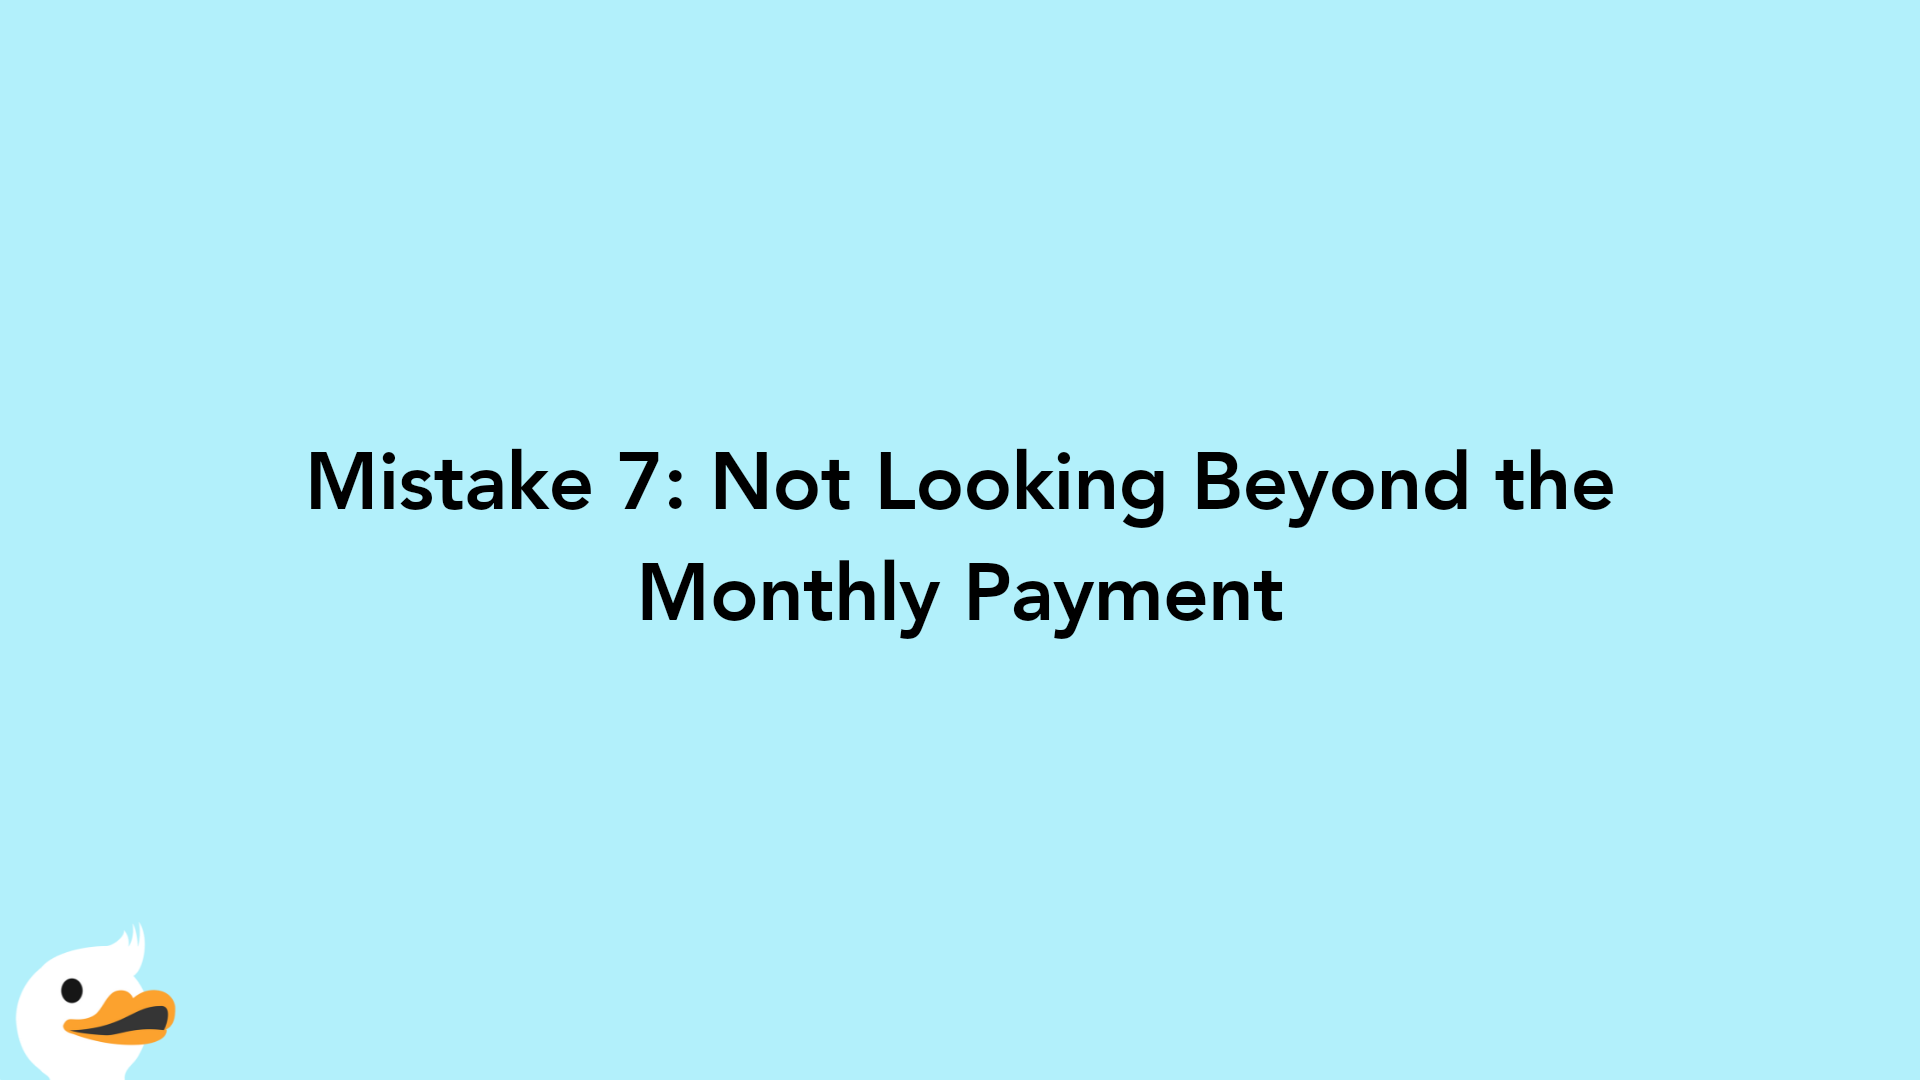 Mistake 7: Not Looking Beyond the Monthly Payment